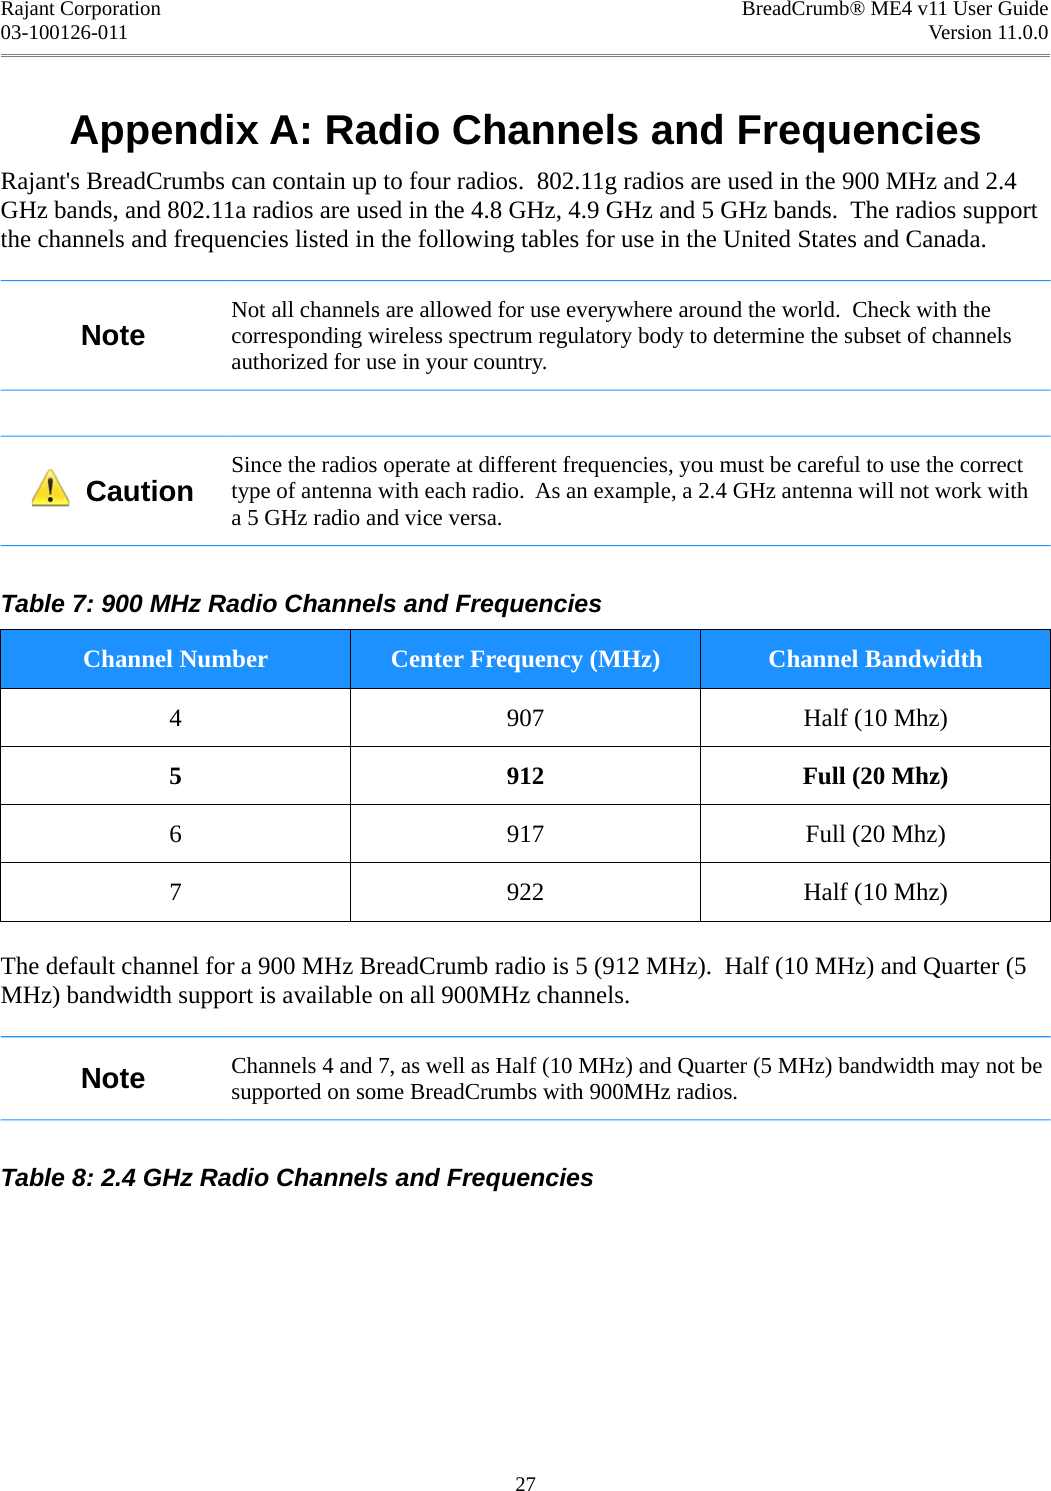 Rajant Corporation BreadCrumb® ME4 v11 User Guide03-100126-011 Version 11.0.0Appendix A: Radio Channels and FrequenciesRajant&apos;s BreadCrumbs can contain up to four radios.  802.11g radios are used in the 900 MHz and 2.4 GHz bands, and 802.11a radios are used in the 4.8 GHz, 4.9 GHz and 5 GHz bands.  The radios support the channels and frequencies listed in the following tables for use in the United States and Canada.NoteNot all channels are allowed for use everywhere around the world.  Check with the corresponding wireless spectrum regulatory body to determine the subset of channels authorized for use in your country.   CautionSince the radios operate at different frequencies, you must be careful to use the correct type of antenna with each radio.  As an example, a 2.4 GHz antenna will not work with a 5 GHz radio and vice versa.Table 7: 900 MHz Radio Channels and FrequenciesChannel Number Center Frequency (MHz) Channel Bandwidth4 907 Half (10 Mhz)5 912 Full (20 Mhz)6 917 Full (20 Mhz)7 922 Half (10 Mhz)The default channel for a 900 MHz BreadCrumb radio is 5 (912 MHz).  Half (10 MHz) and Quarter (5 MHz) bandwidth support is available on all 900MHz channels.Note Channels 4 and 7, as well as Half (10 MHz) and Quarter (5 MHz) bandwidth may not be supported on some BreadCrumbs with 900MHz radios.Table 8: 2.4 GHz Radio Channels and Frequencies27